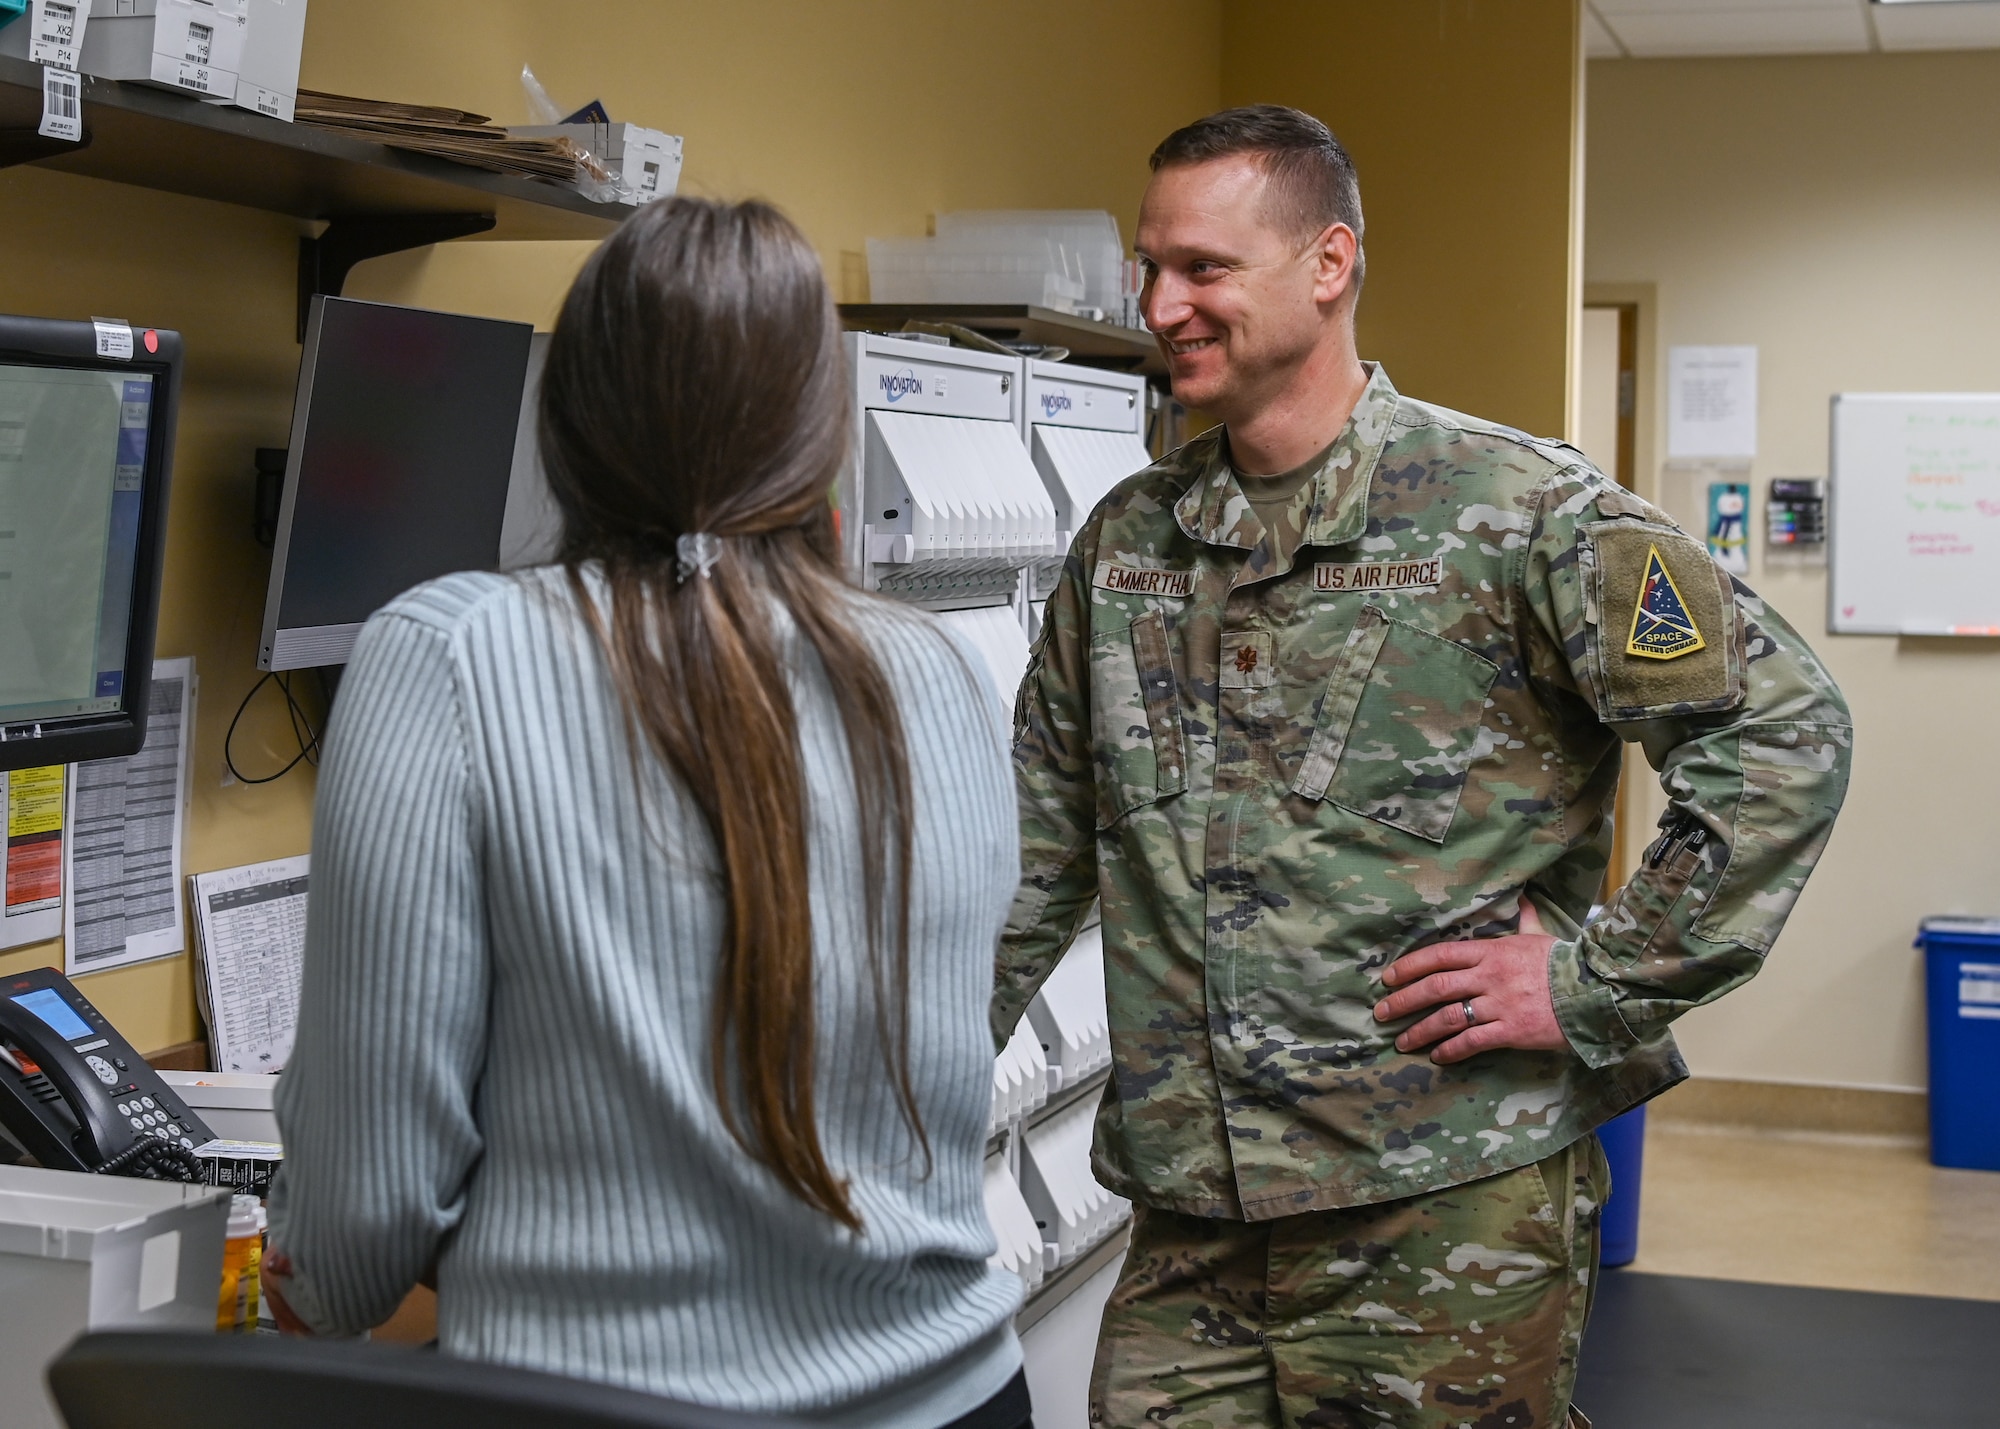 30th Medical Group diagnostics and therapeutics flight commander, works with a colleague to fill prescriptions at the 30th Medical Group pharmacy at Vandenberg Space Force Base.